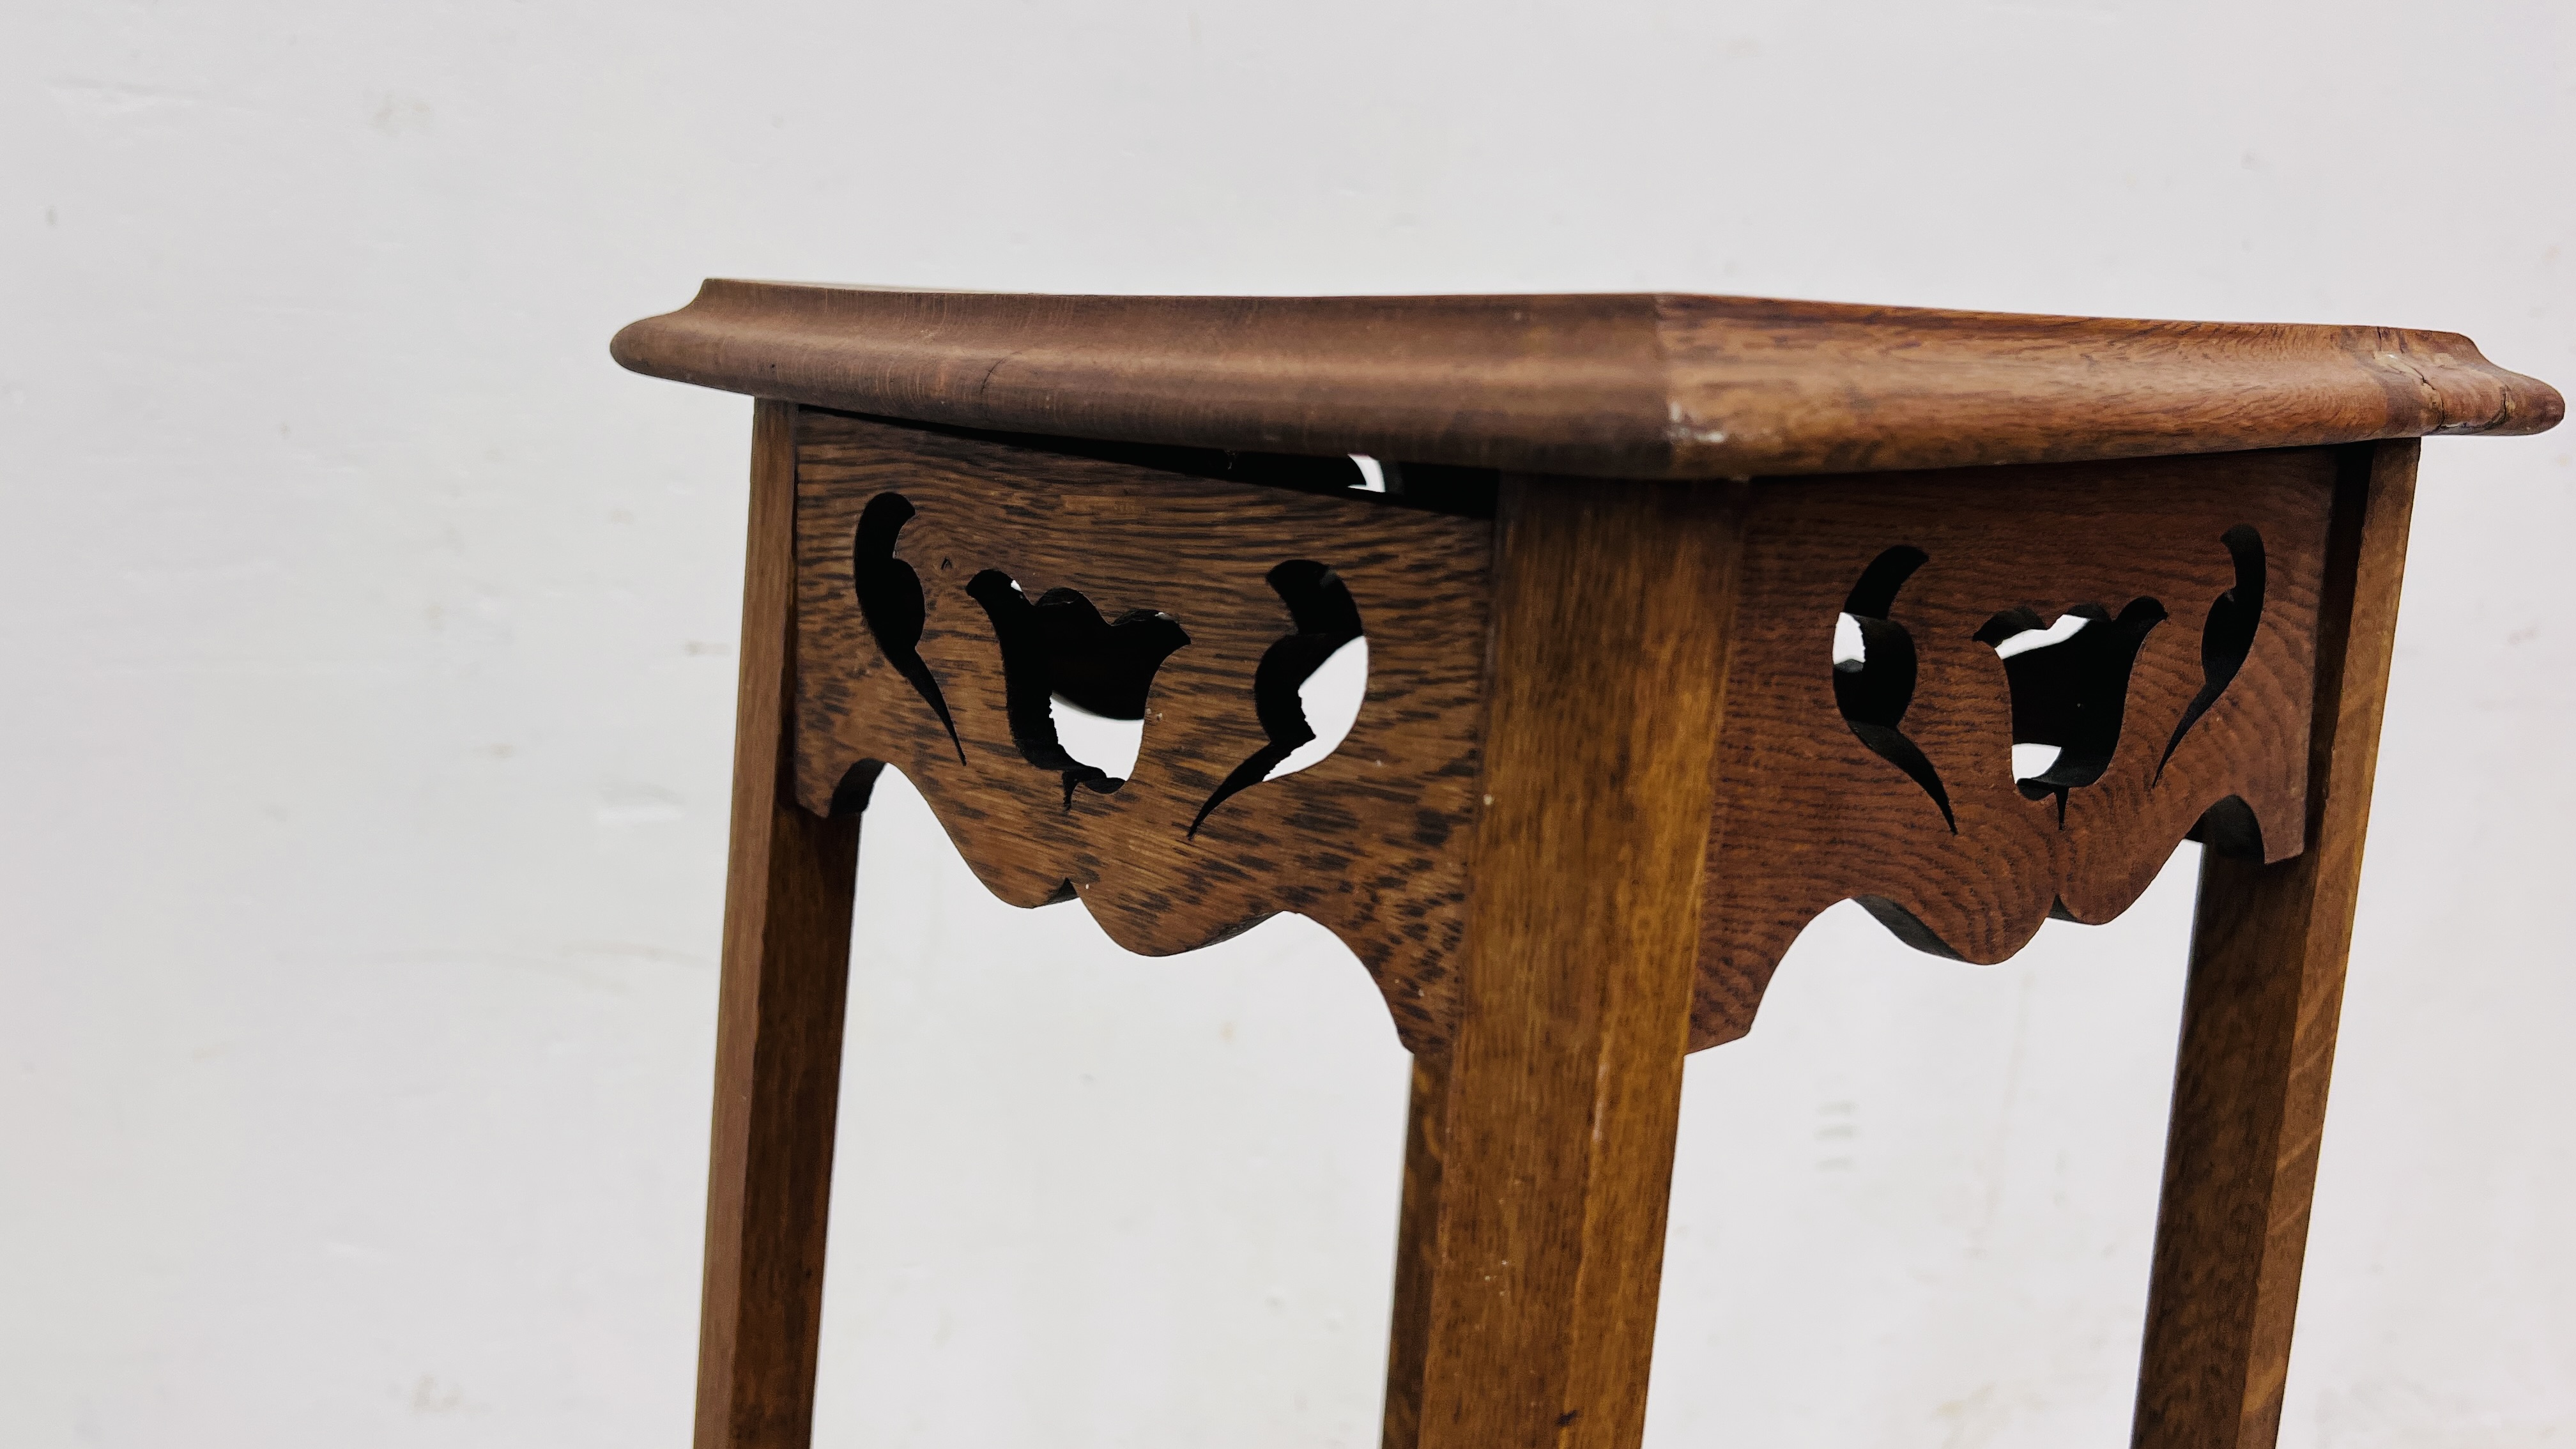 A VINTAGE OAK PLANT STAND WITH FRETT WORK DETAIL. - Image 3 of 6